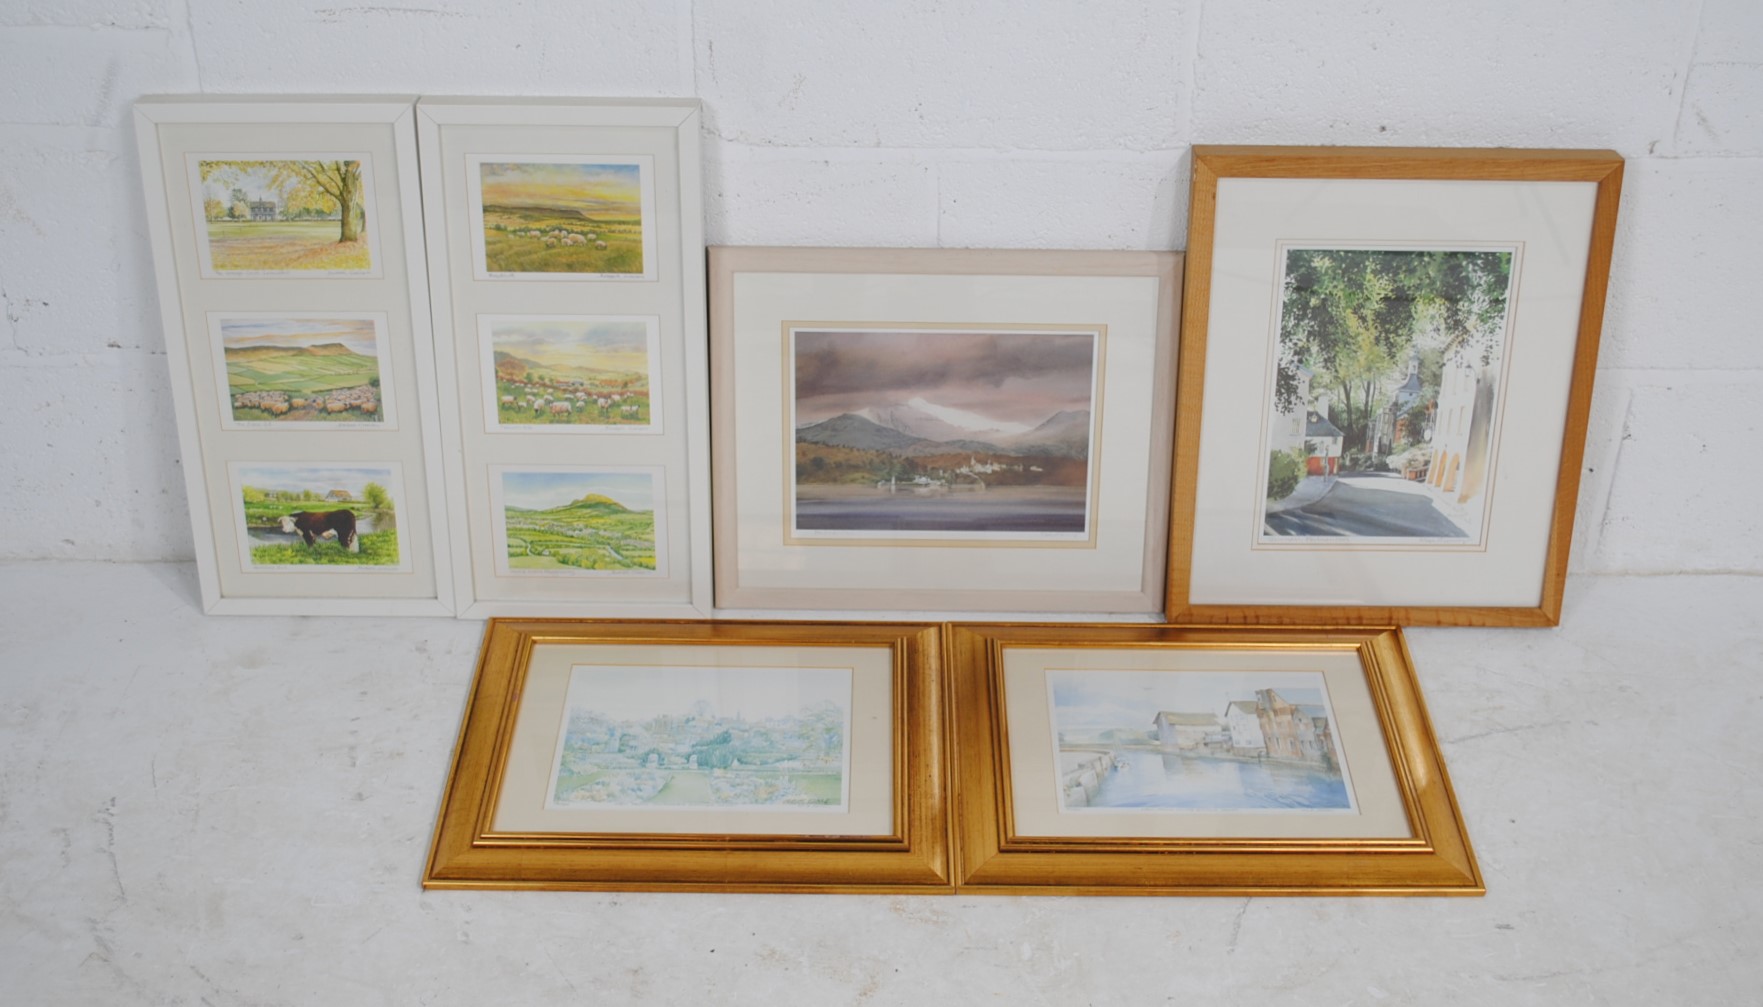 A quantity of framed pictures and prints, including two signed limited edition prints by Rob Piercy,